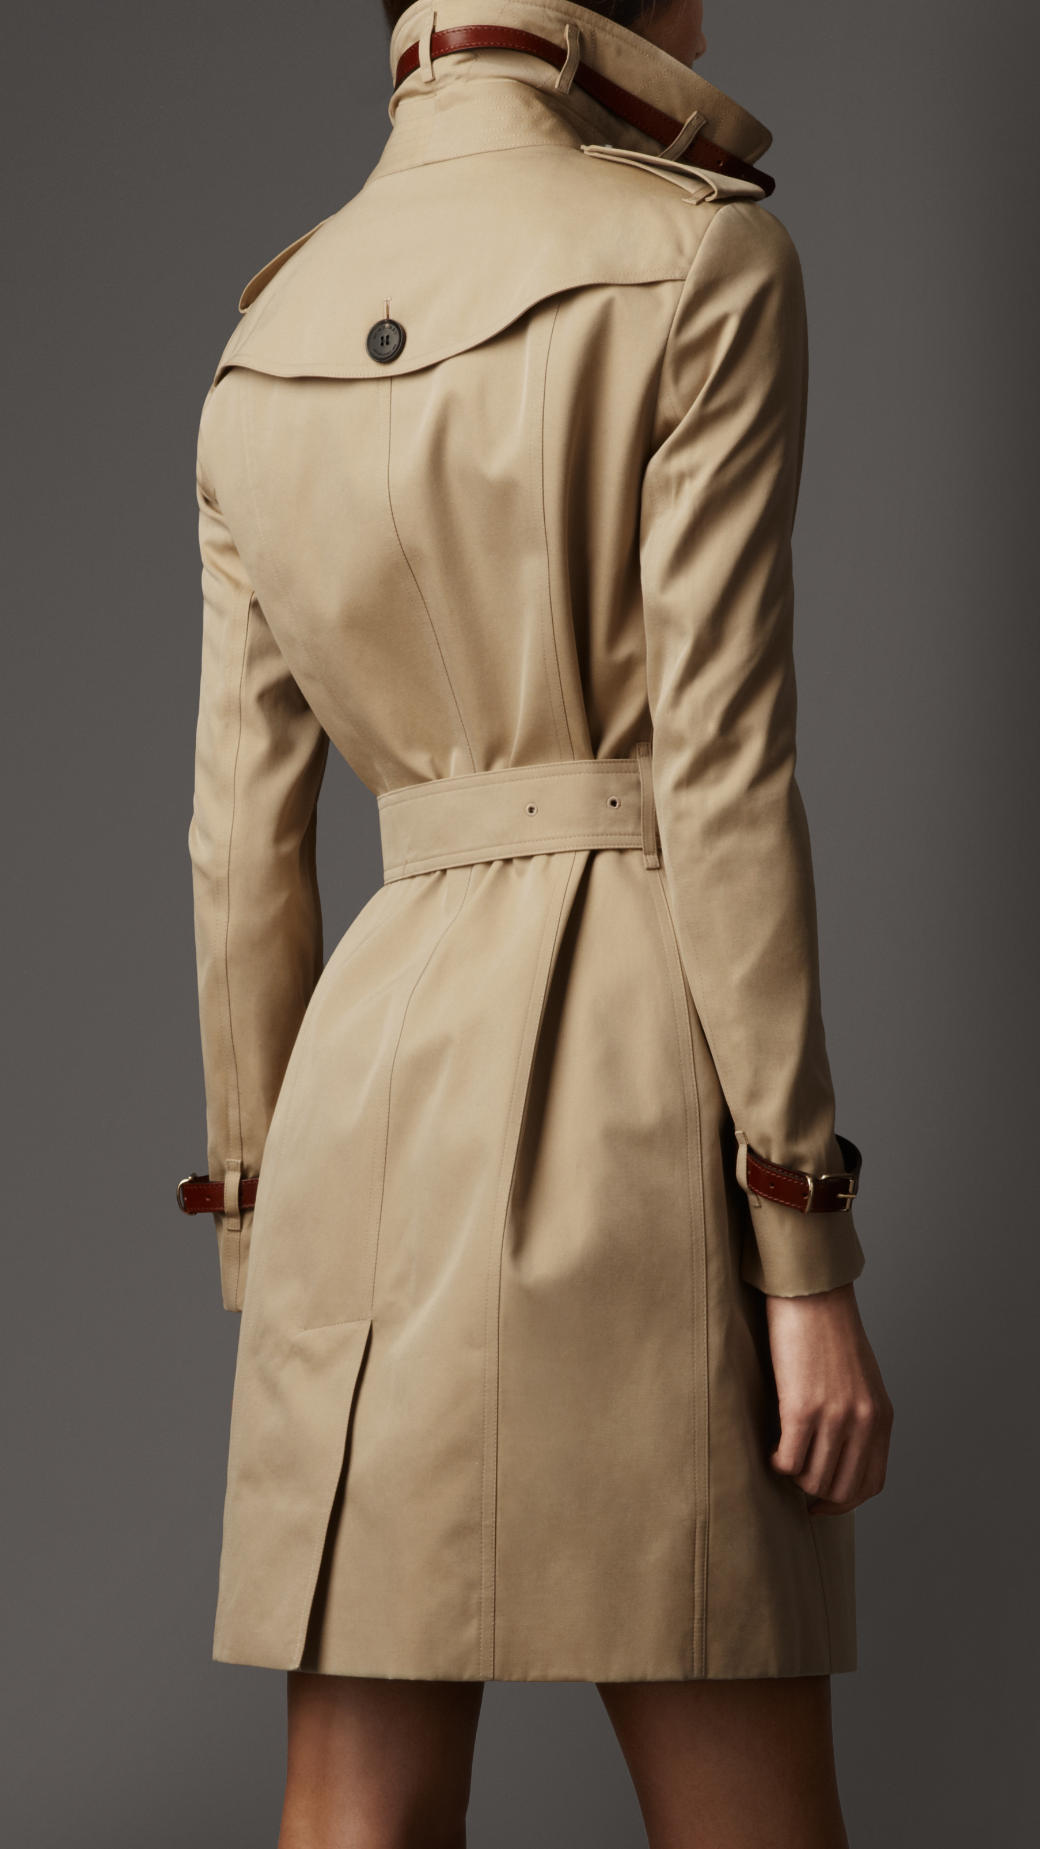 Lyst - Burberry Long Leather Detail Gabardine Trench Coat in Natural